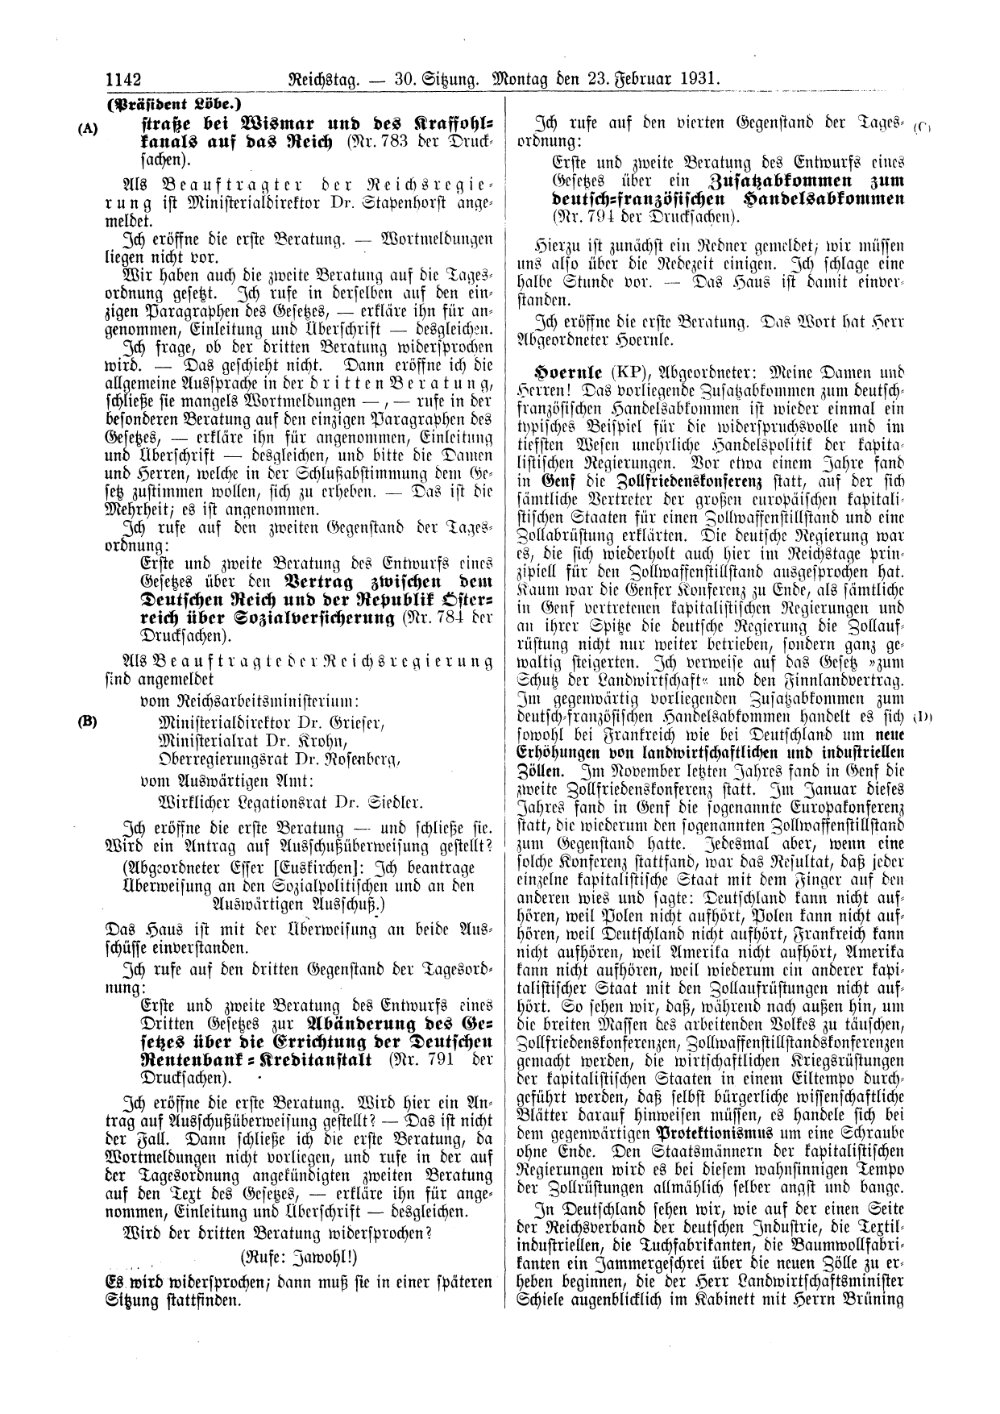 Scan of page 1142